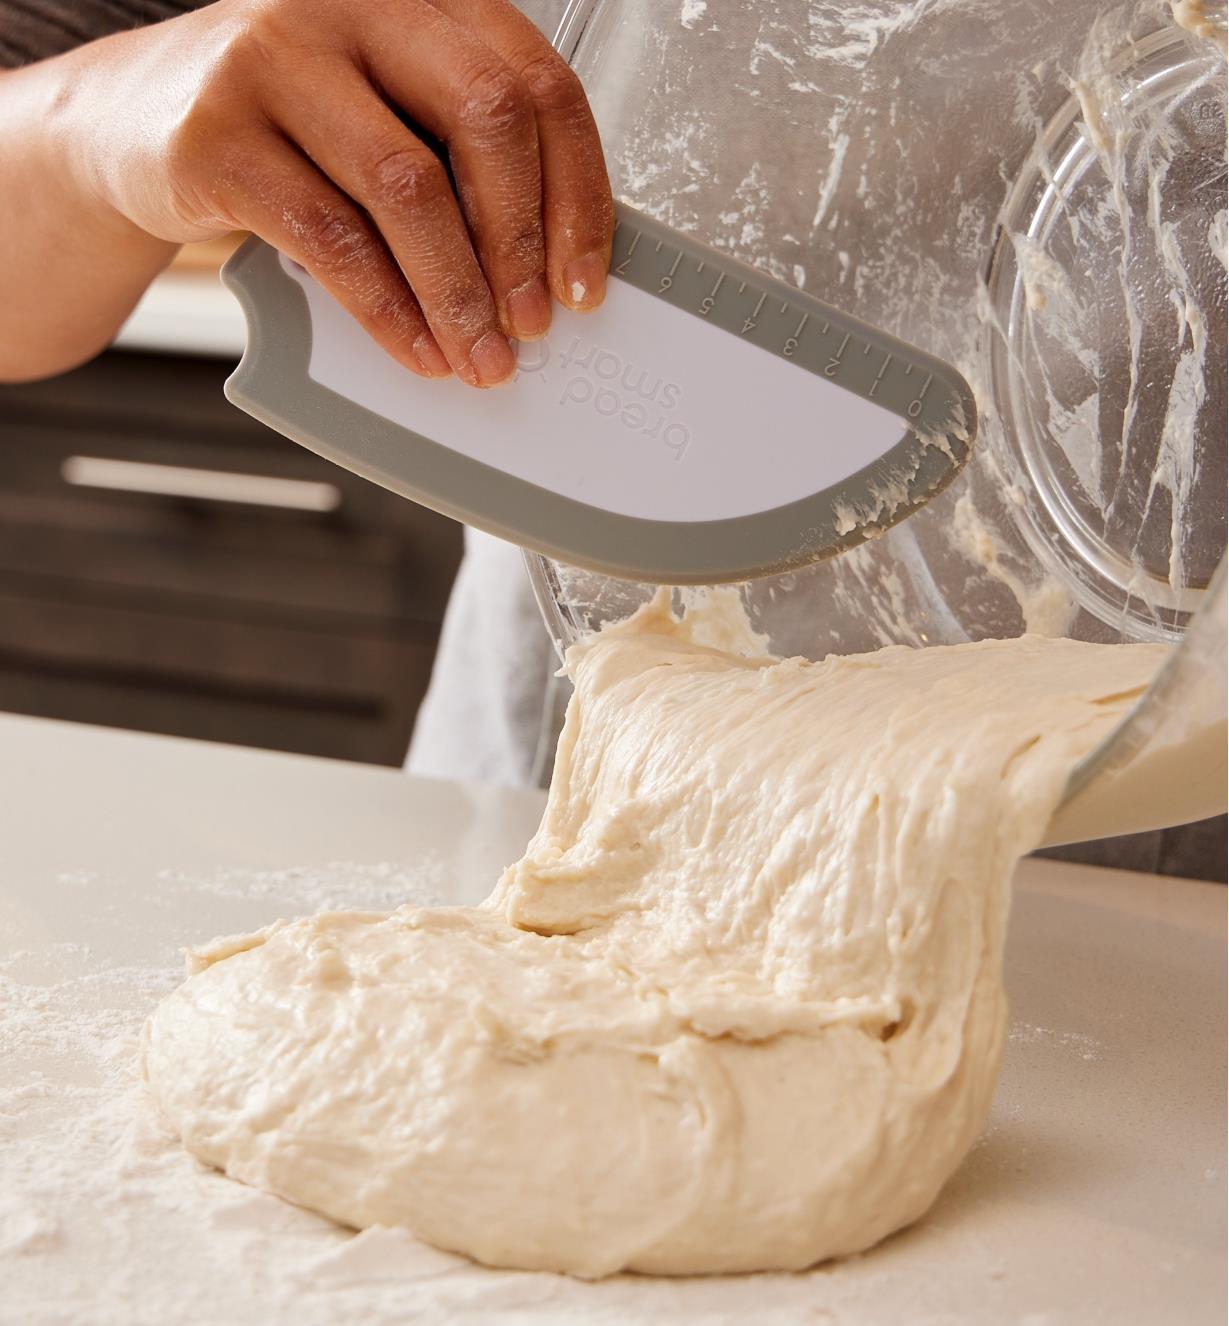 Placing fresh dough on a floured countertop, using a bowl scraper to remove it from a mixing bowl